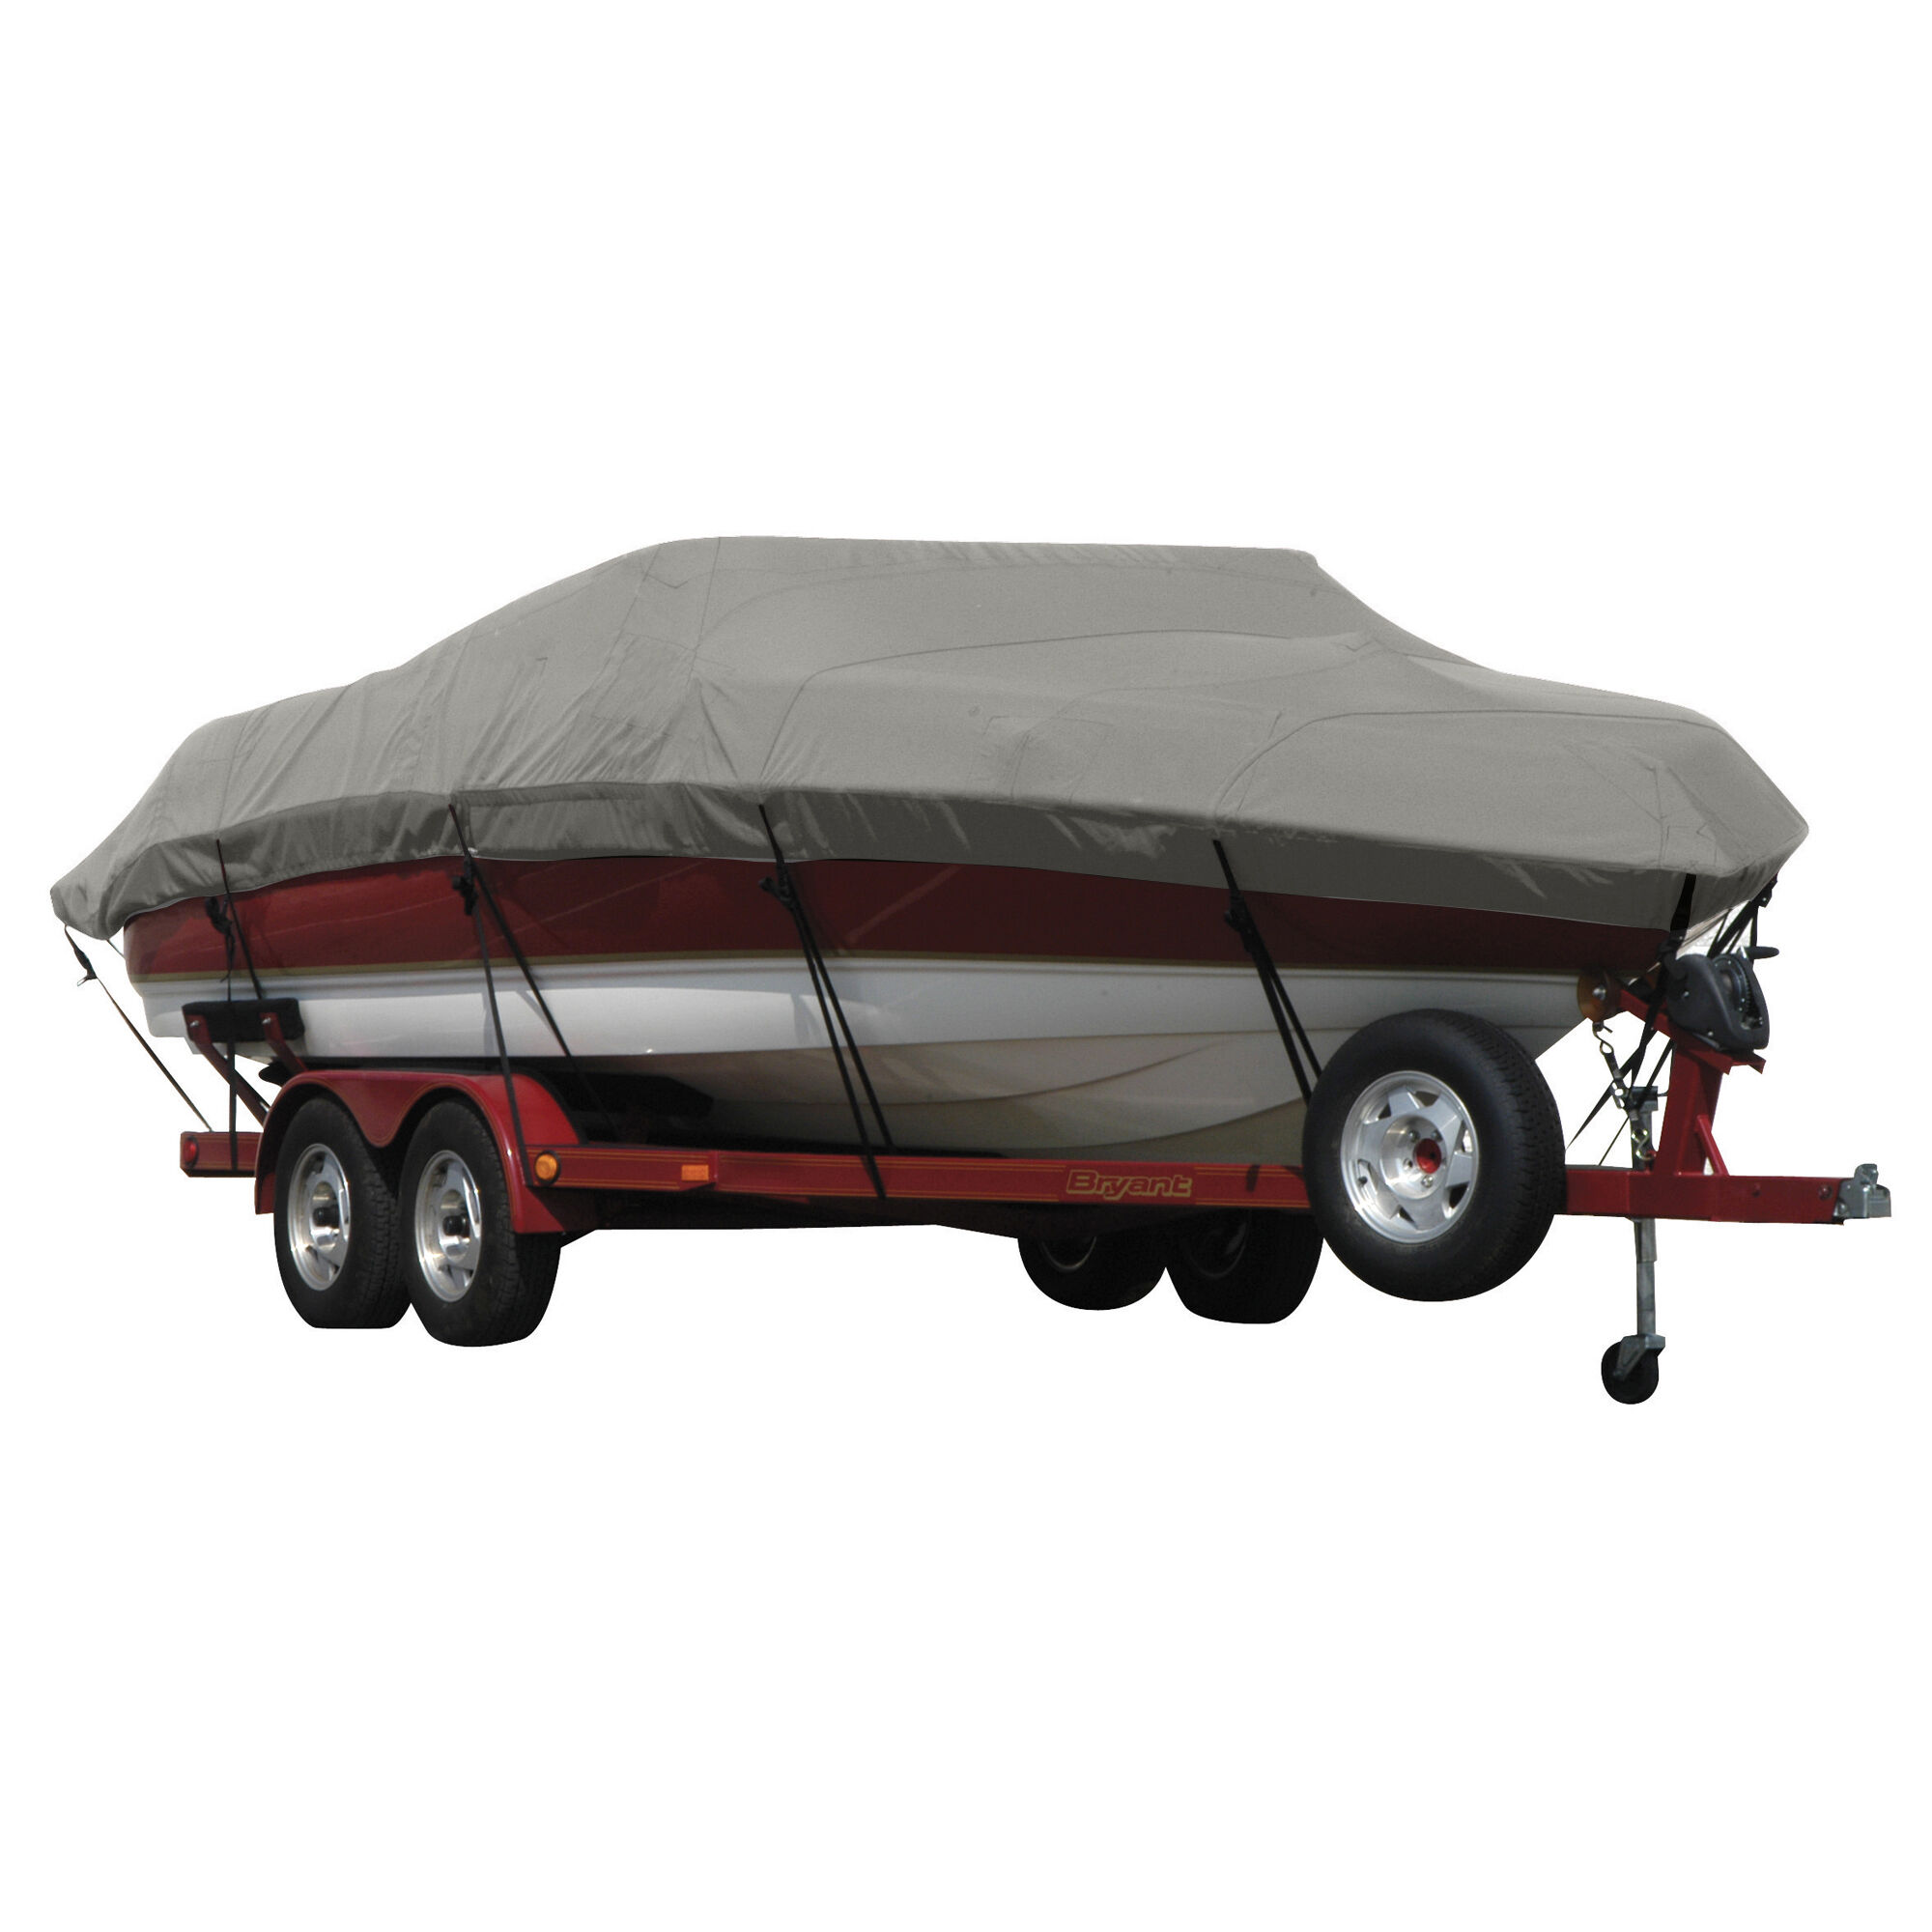 Covermate Exact Fit Sunbrella Boat Cover for Baja 33 Outlaw 33 Outlaw Does Not Cover PLATFORMm I/O. Charcoal Grey Heather in Charcoal Grey Heather